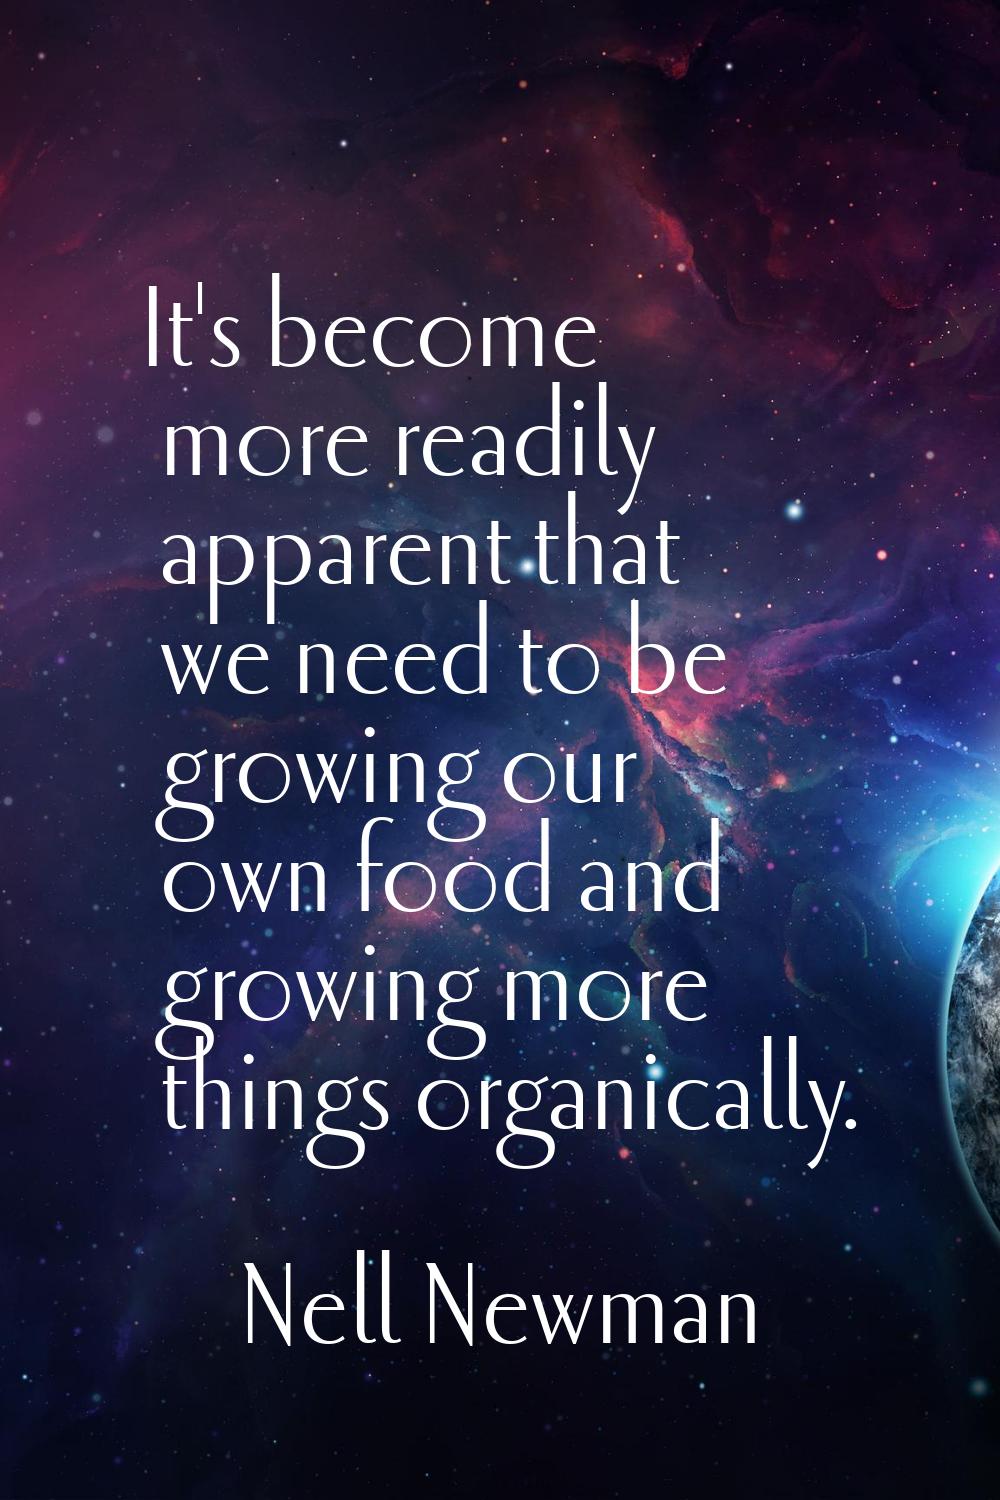 It's become more readily apparent that we need to be growing our own food and growing more things o